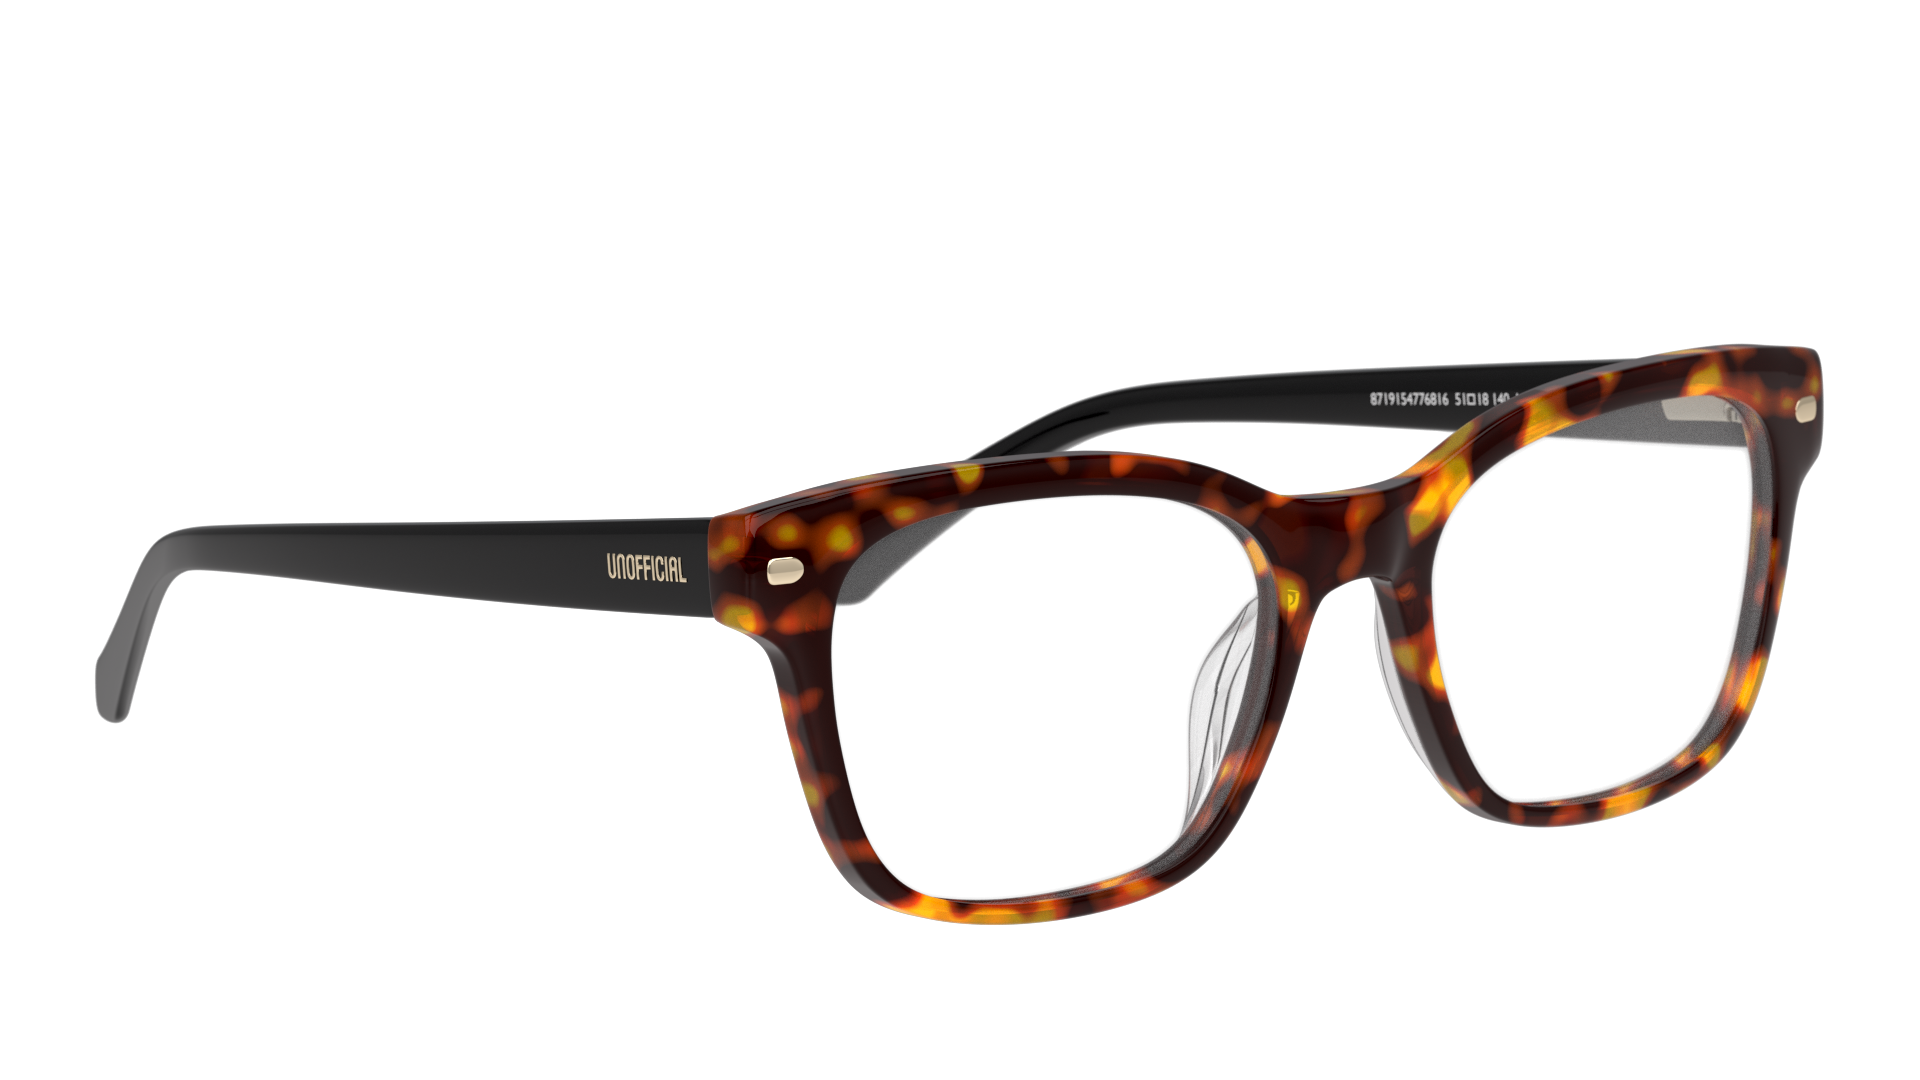 Angle_Right01 Unofficial UNOF0246 (HB00) Glasses Transparent / Tortoise Shell